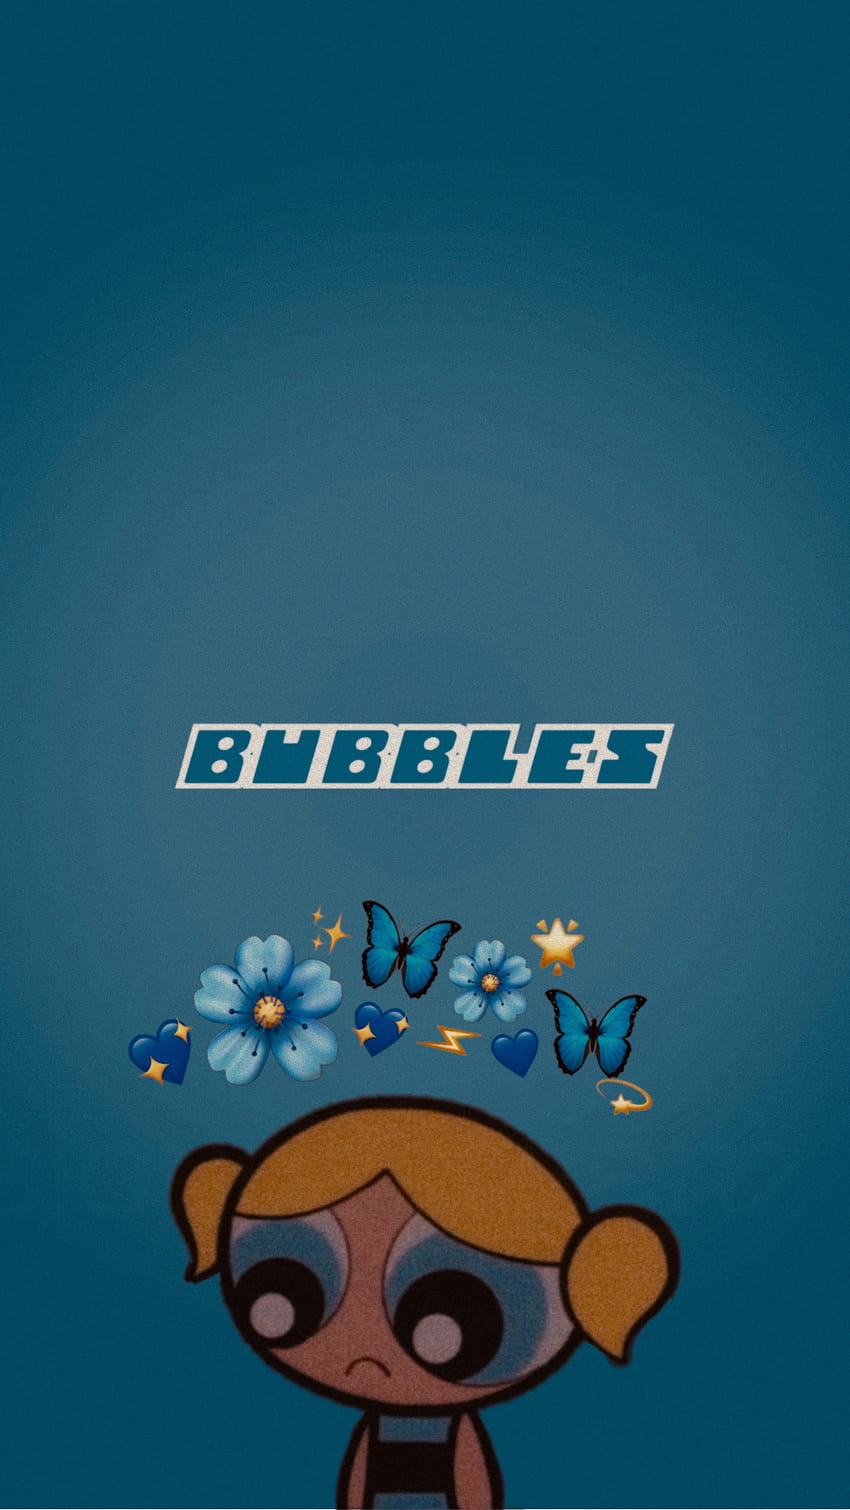 20 Bubbles Powerpuff Girls HD Wallpapers and Backgrounds